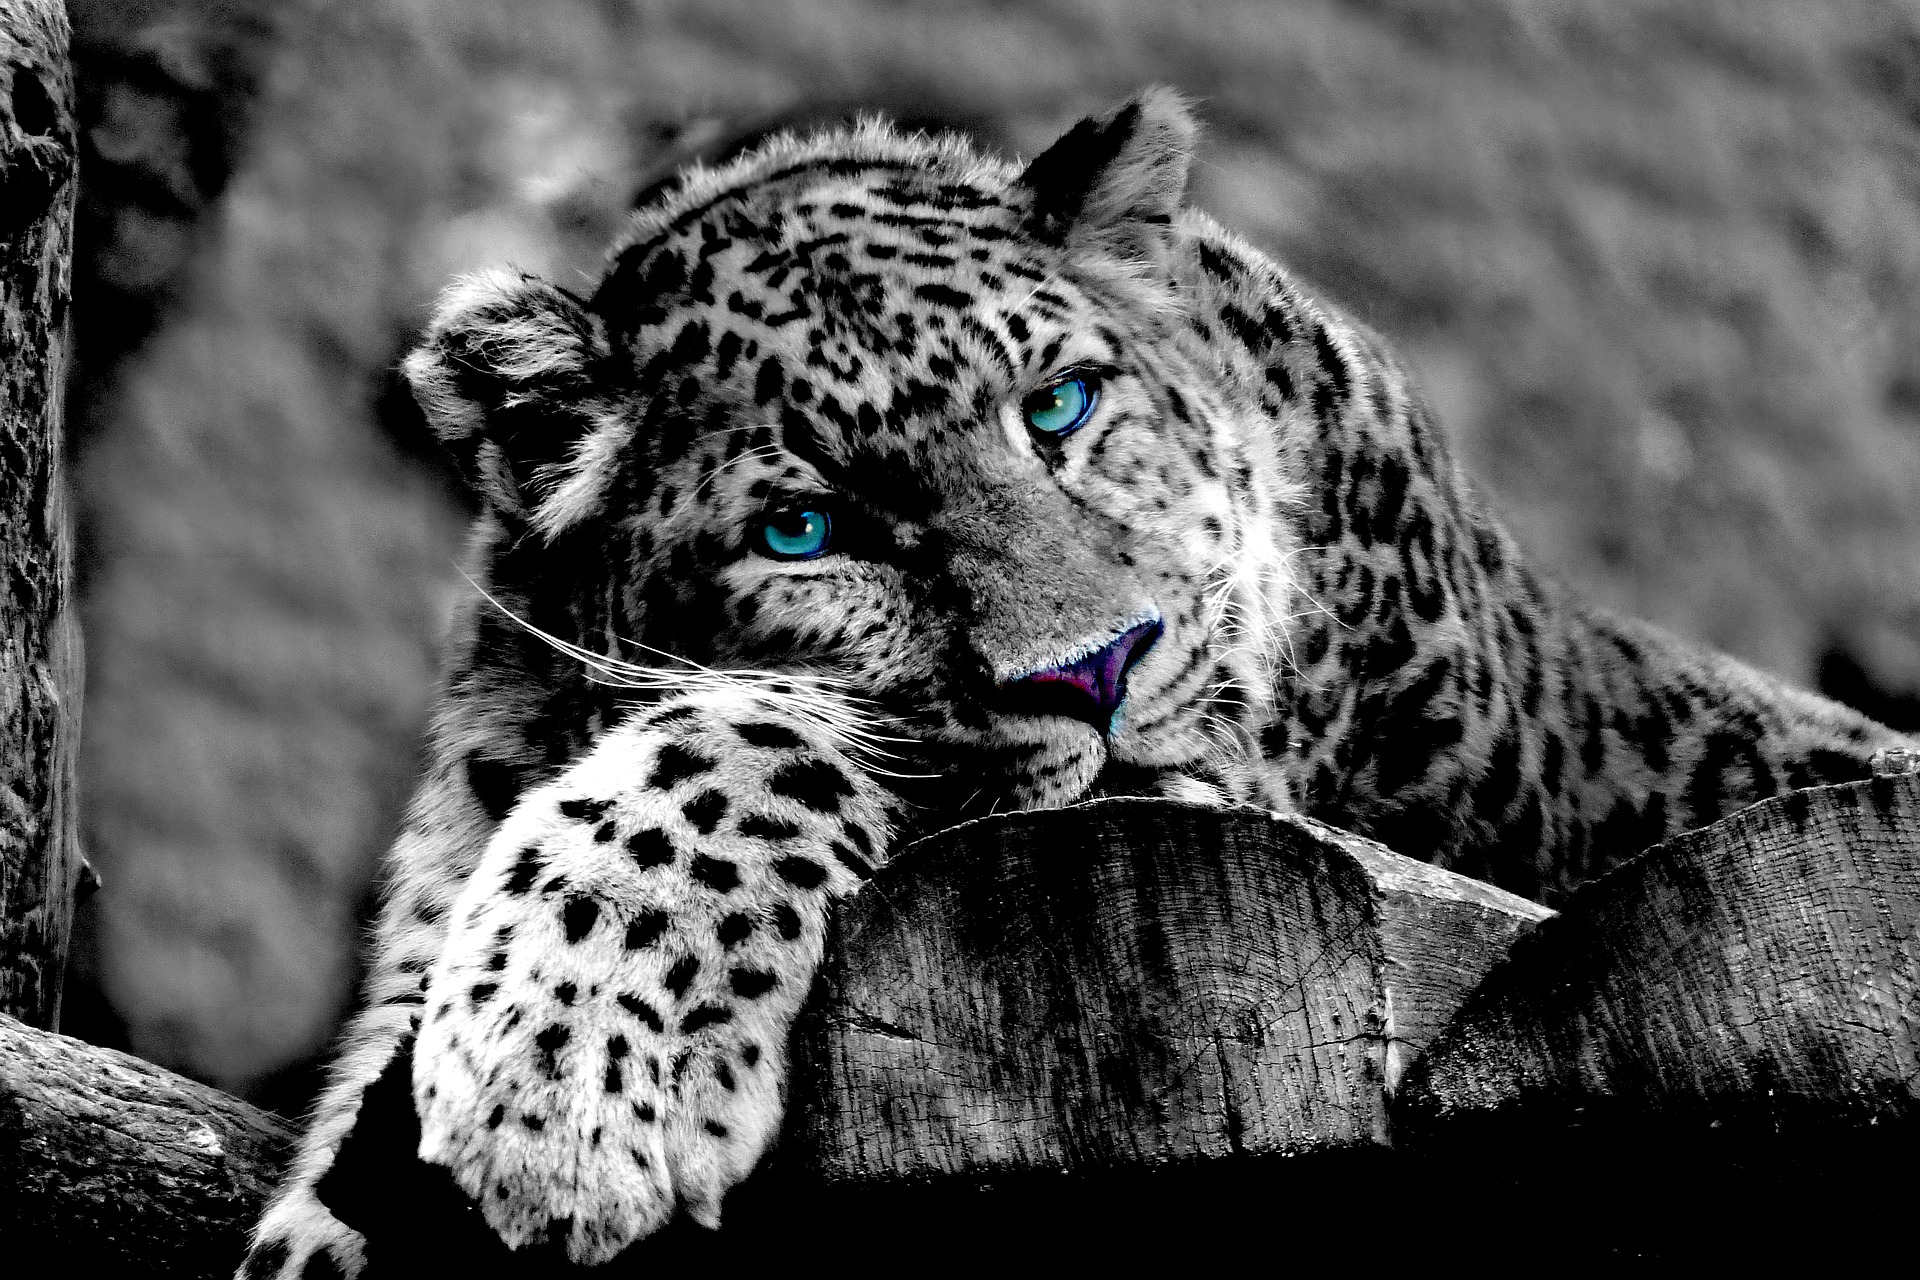 Leopard with blue piercing eyes